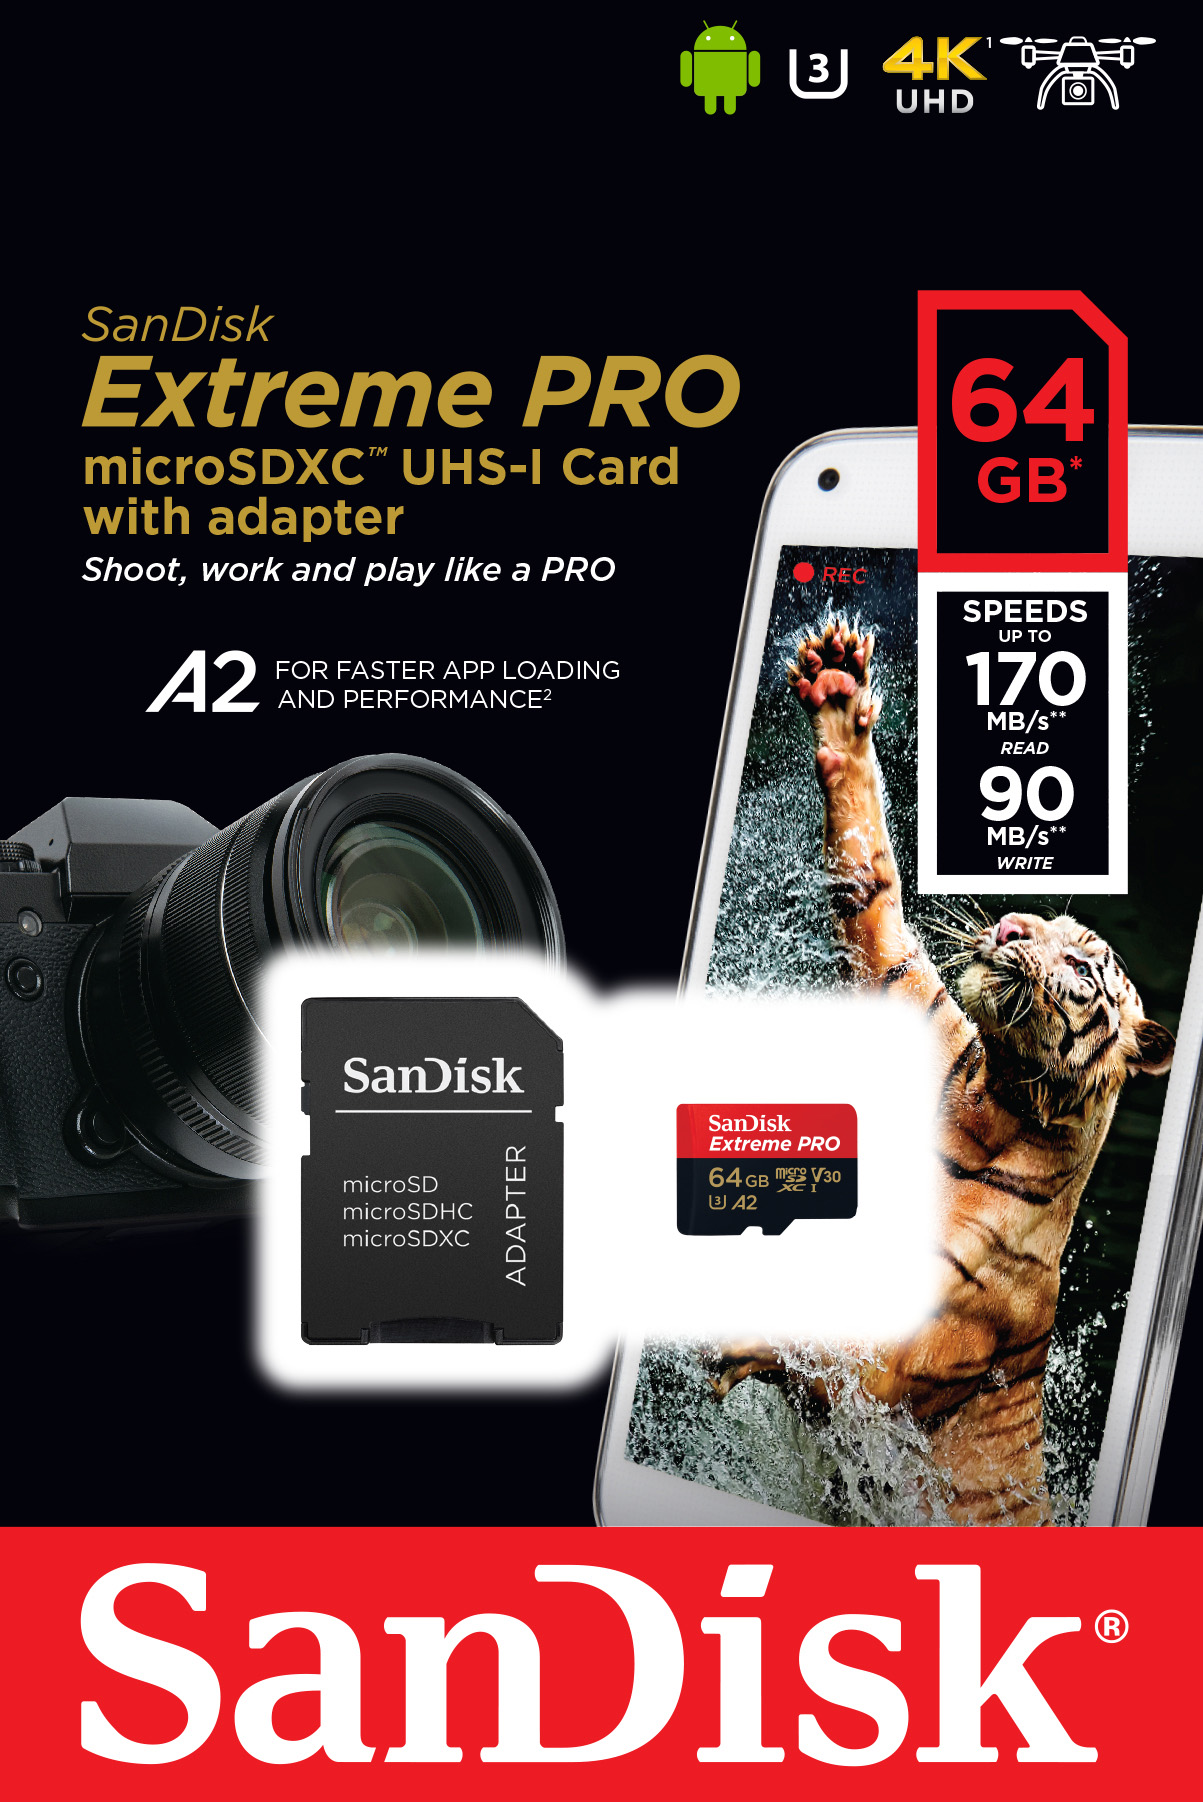 Sandisk microSDXC Card 64GB, Extreme PRO, U3, A2, 4K UHD (R) 170MB/s, (W) 90MB/s, SD Adapter, Retail-Blister